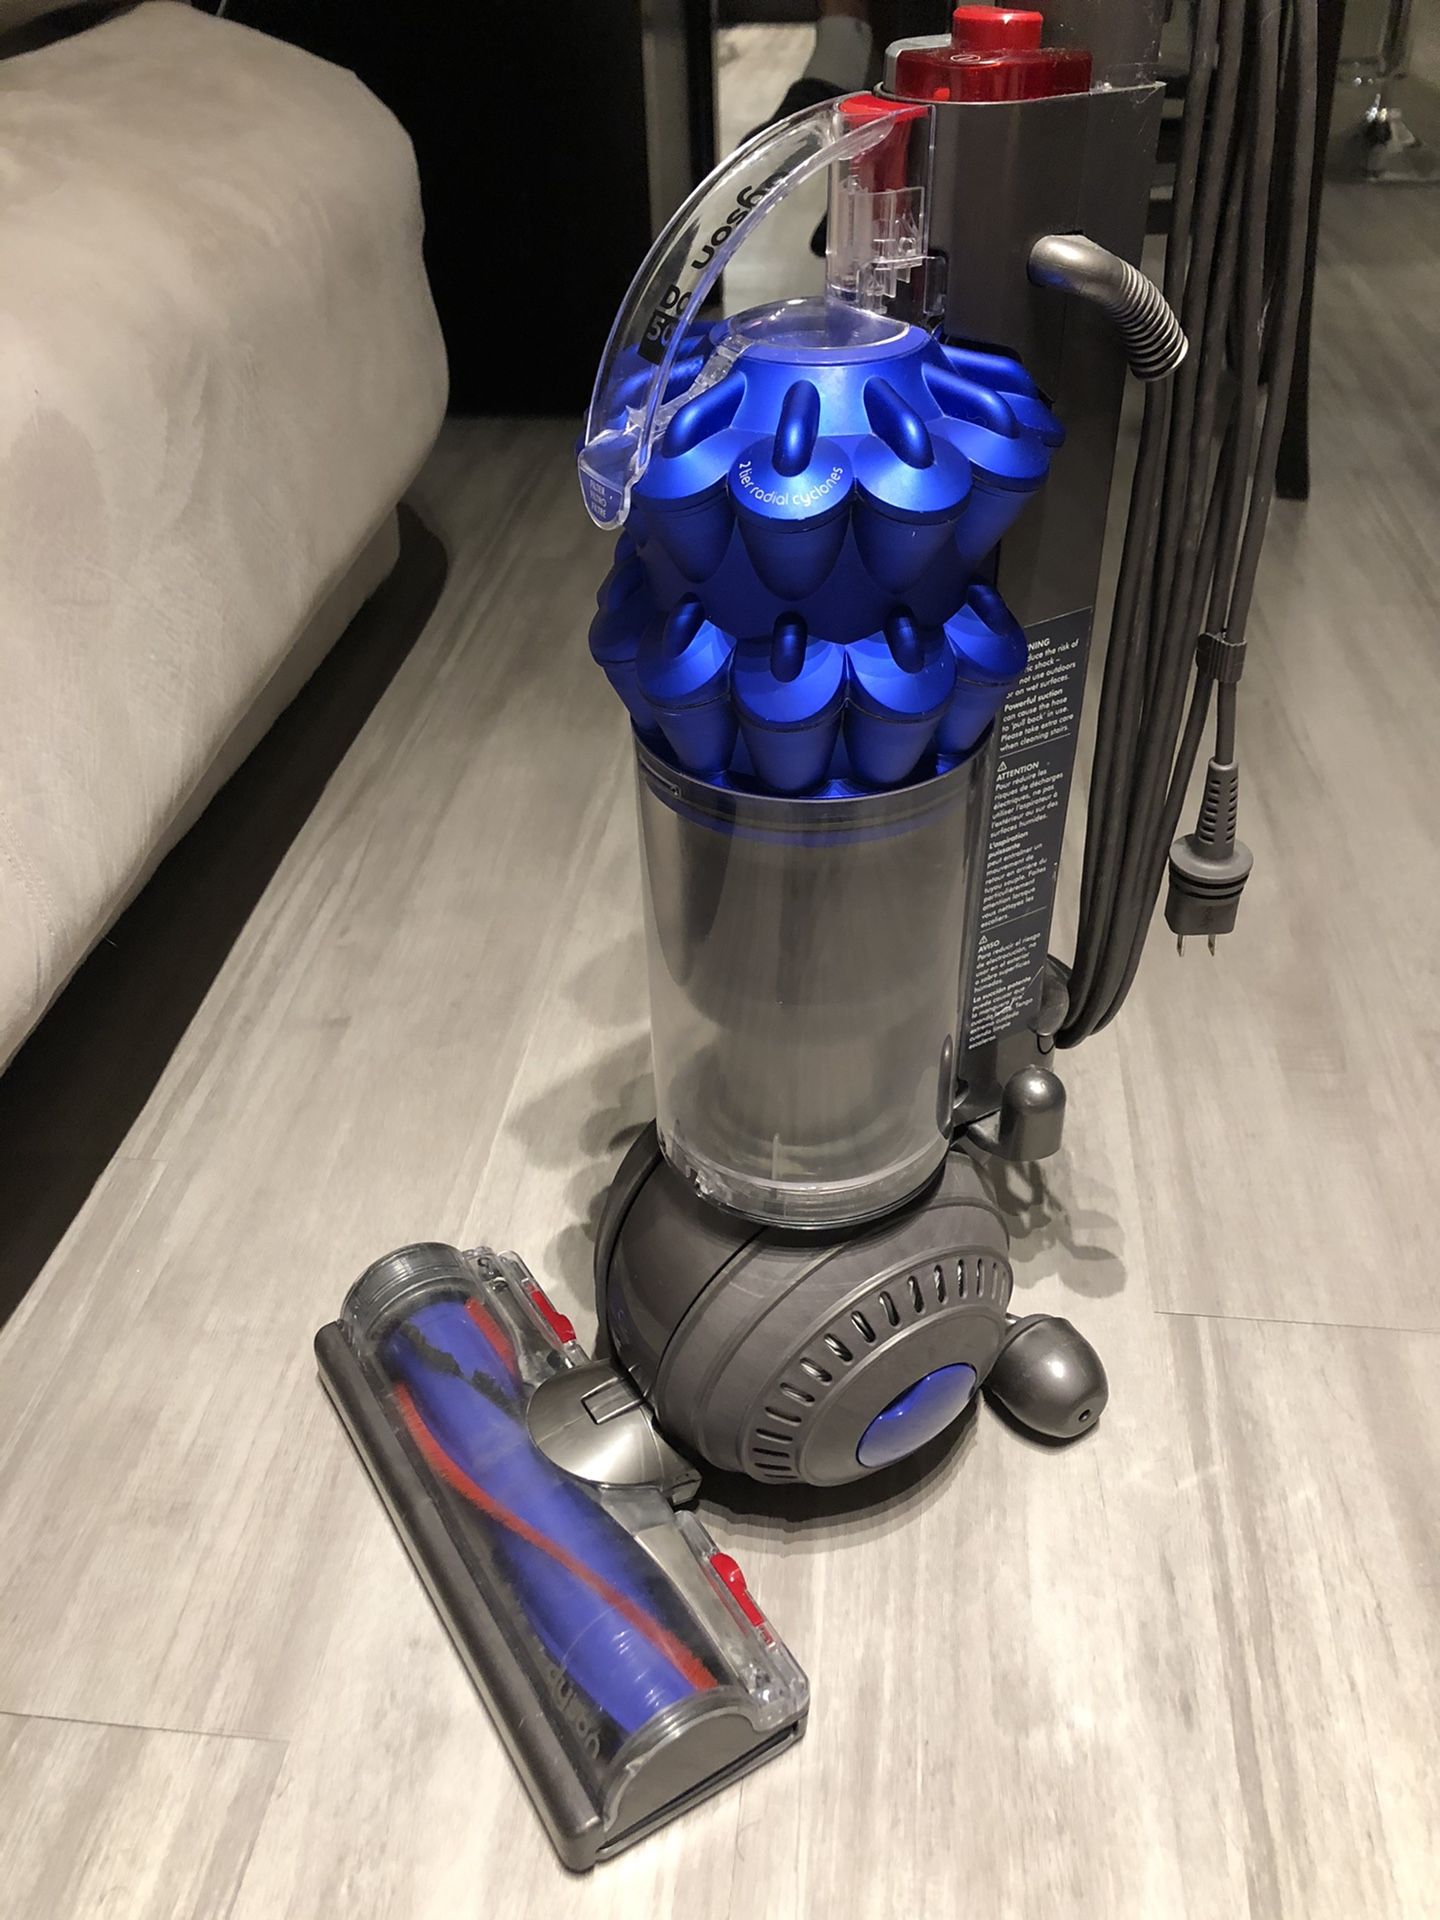 Dyson DC50 in Good Condition!